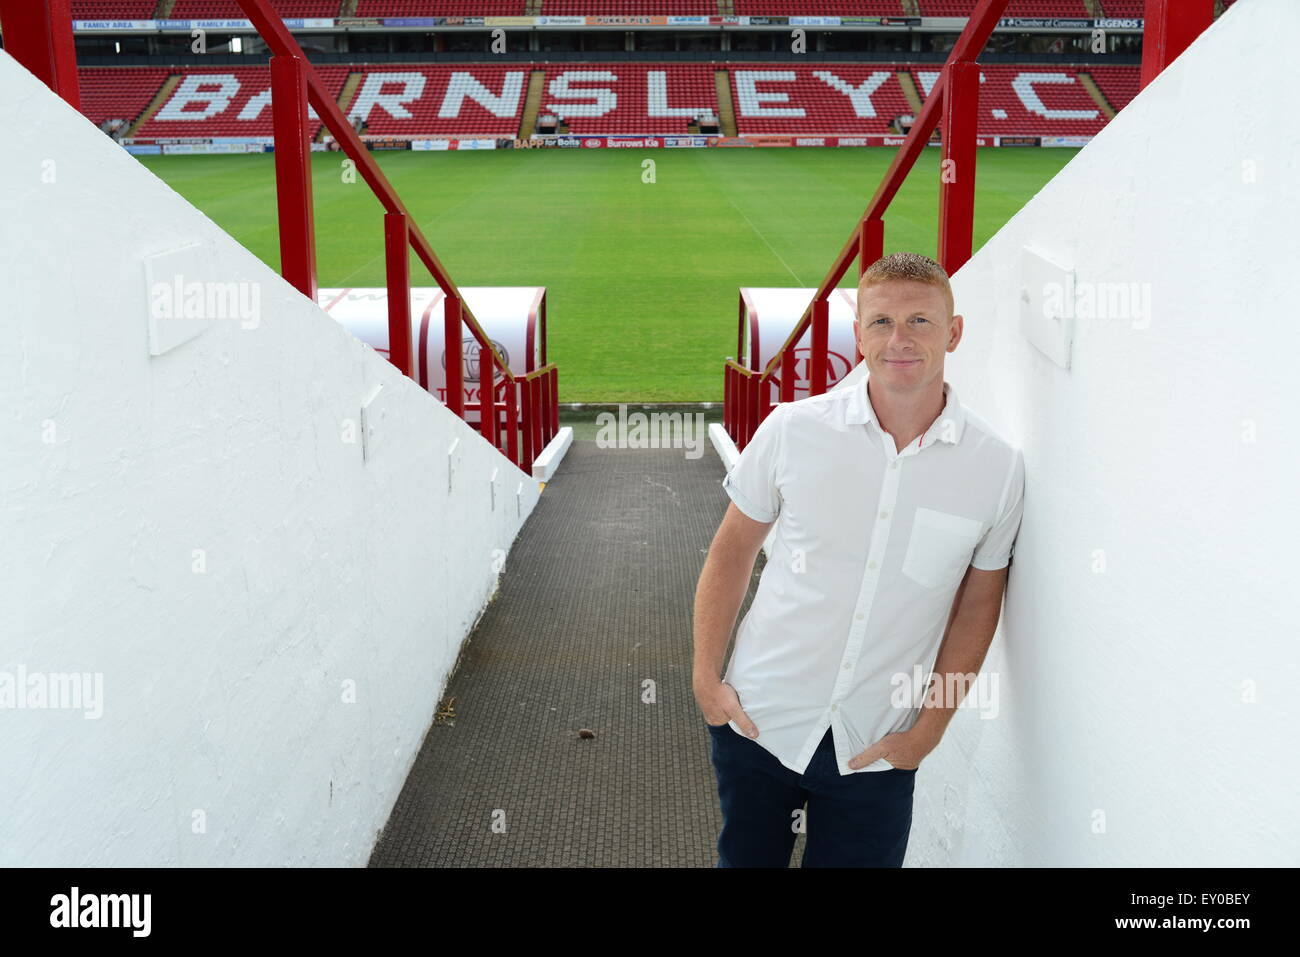 Ex Barnsley FC footballer Bobby Hassell at the Barnsley FC Football Ground. Picture: Scott Bairstow/Alamy Stock Photo